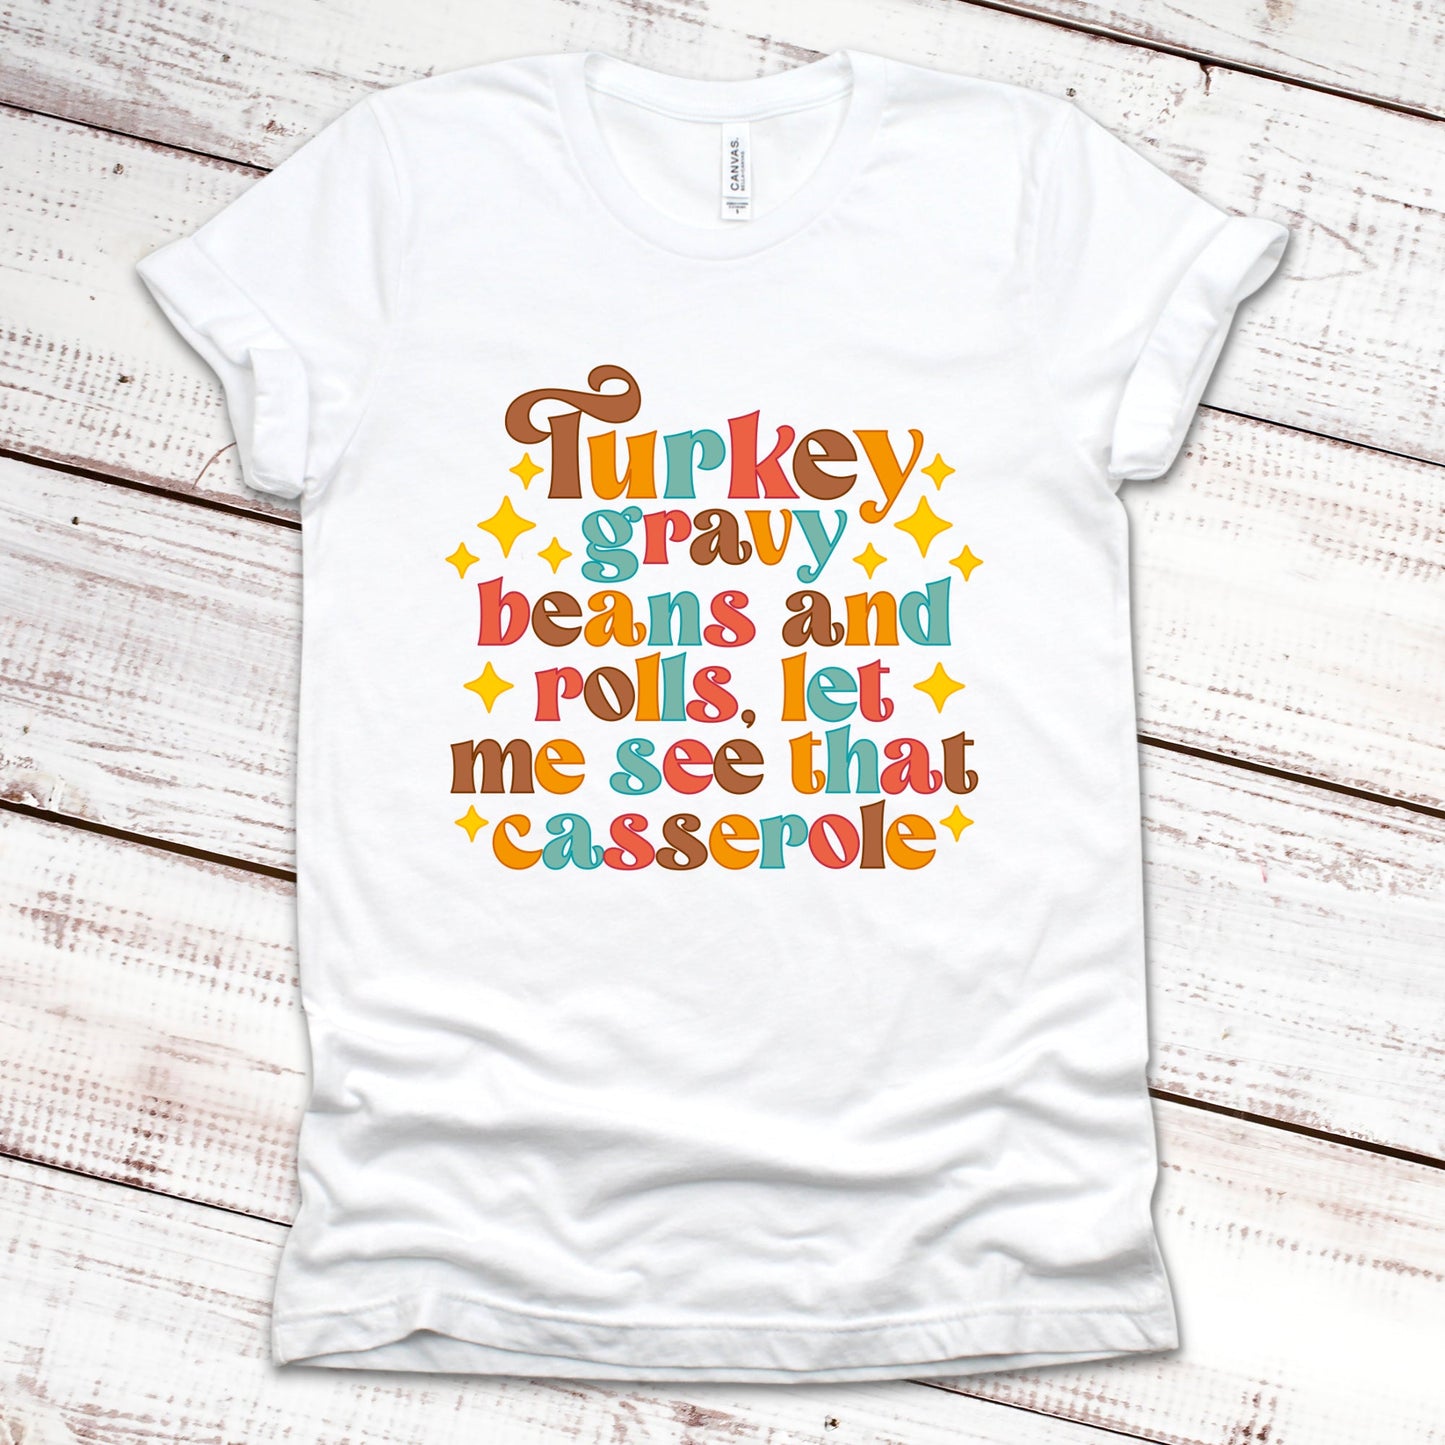 Turkey Gravy Beans and Rolls, Let Me See That Casserole Thanksgiving Shirt Great Giftables White XS 